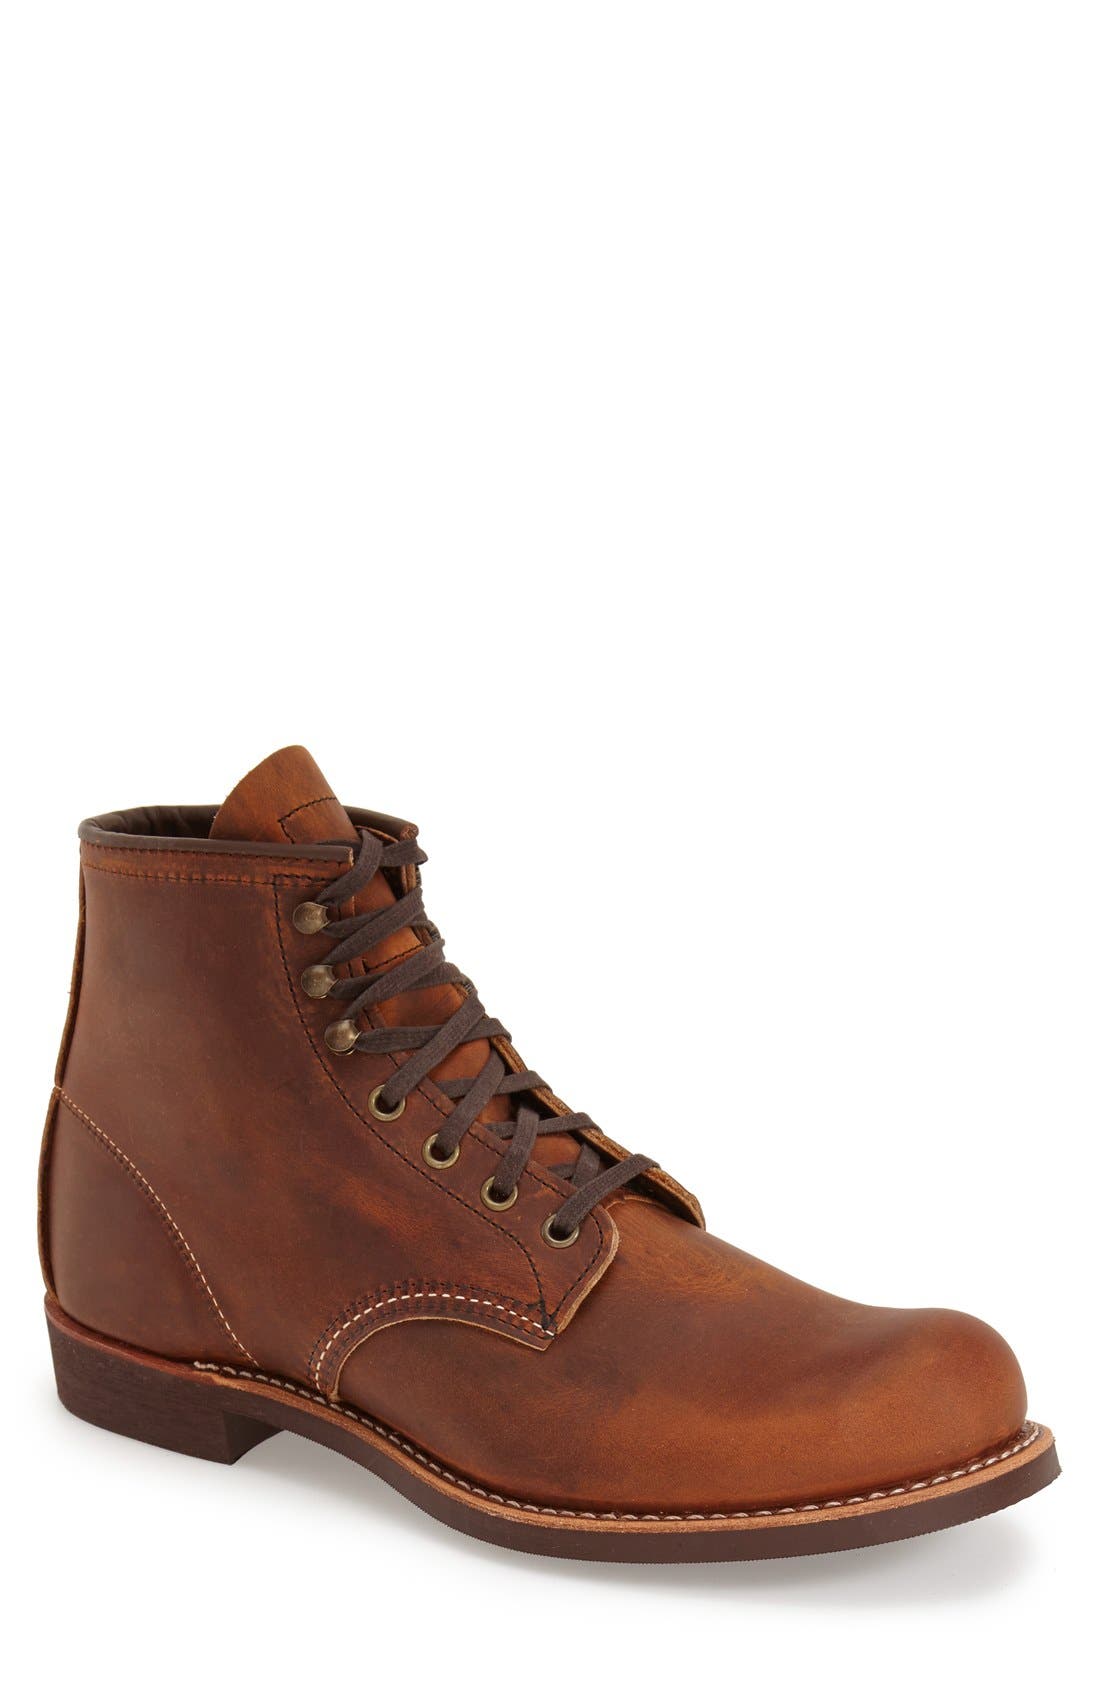 buy red wing boots near me